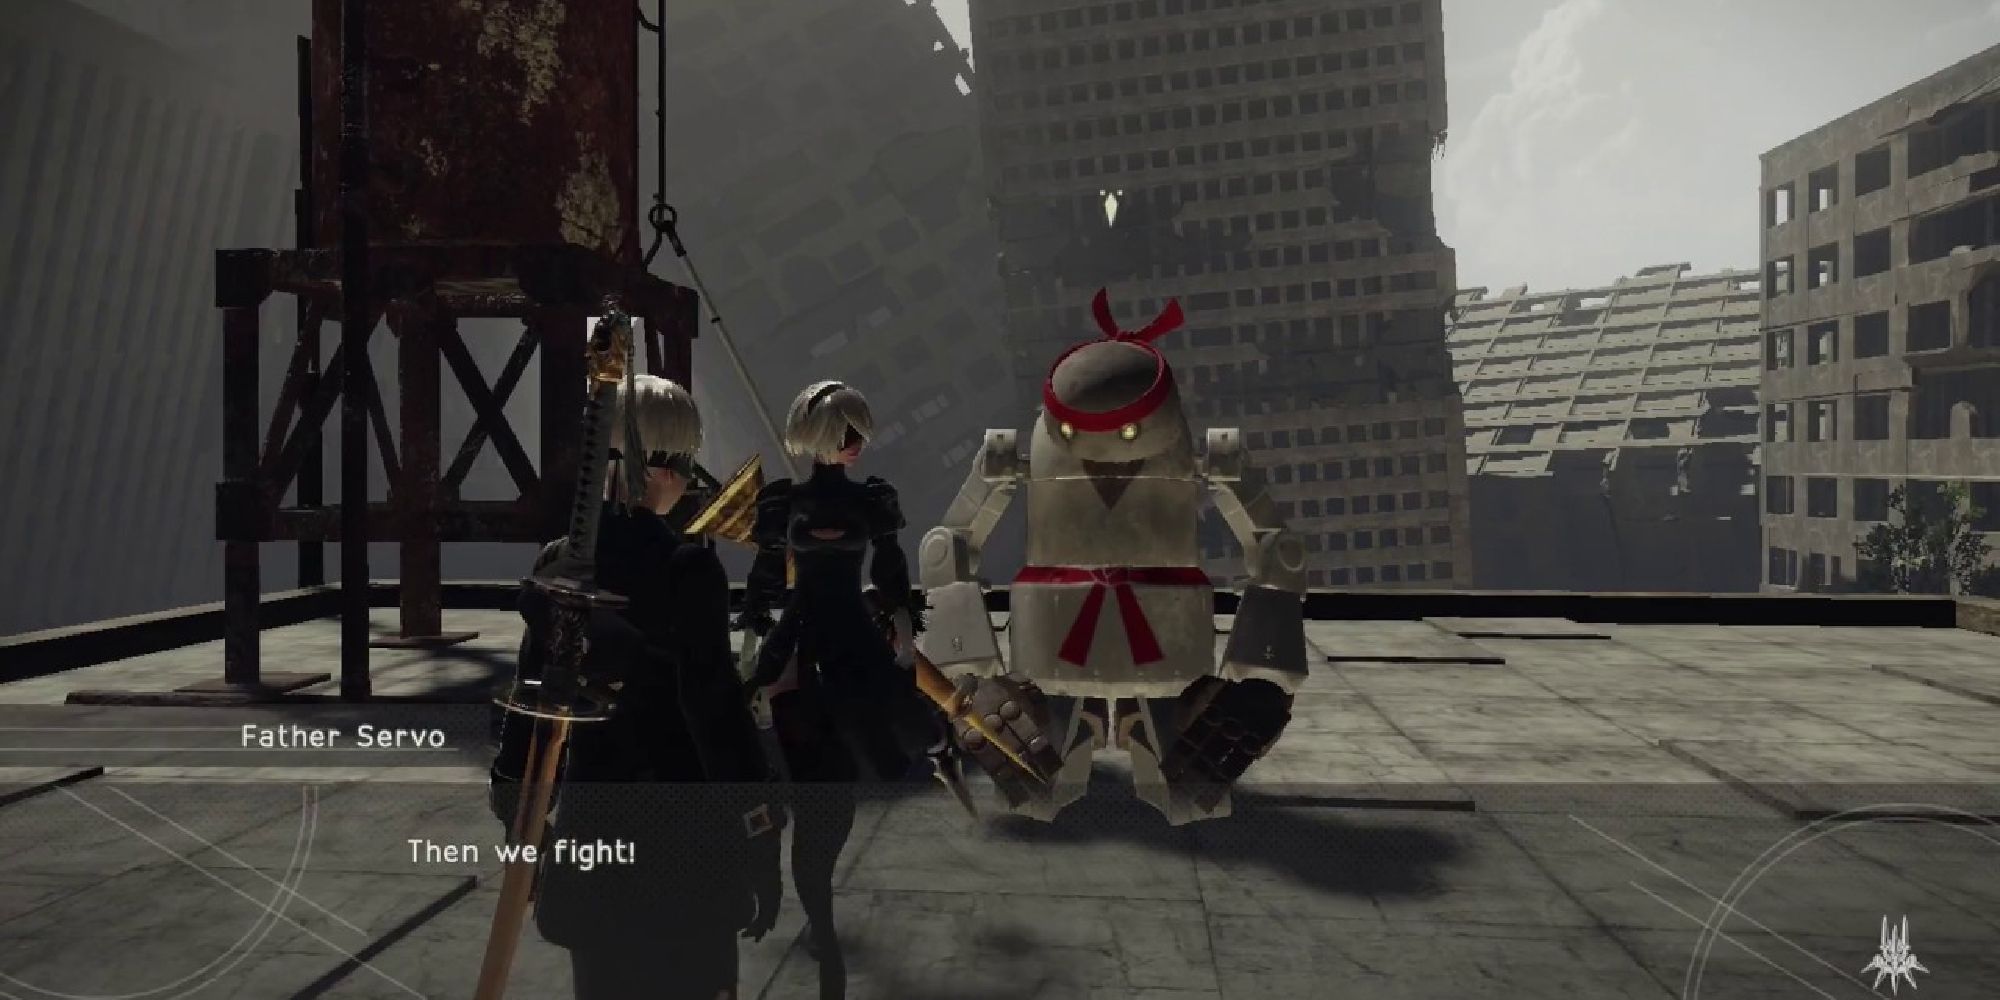 2B and 9S encountering Father Servo